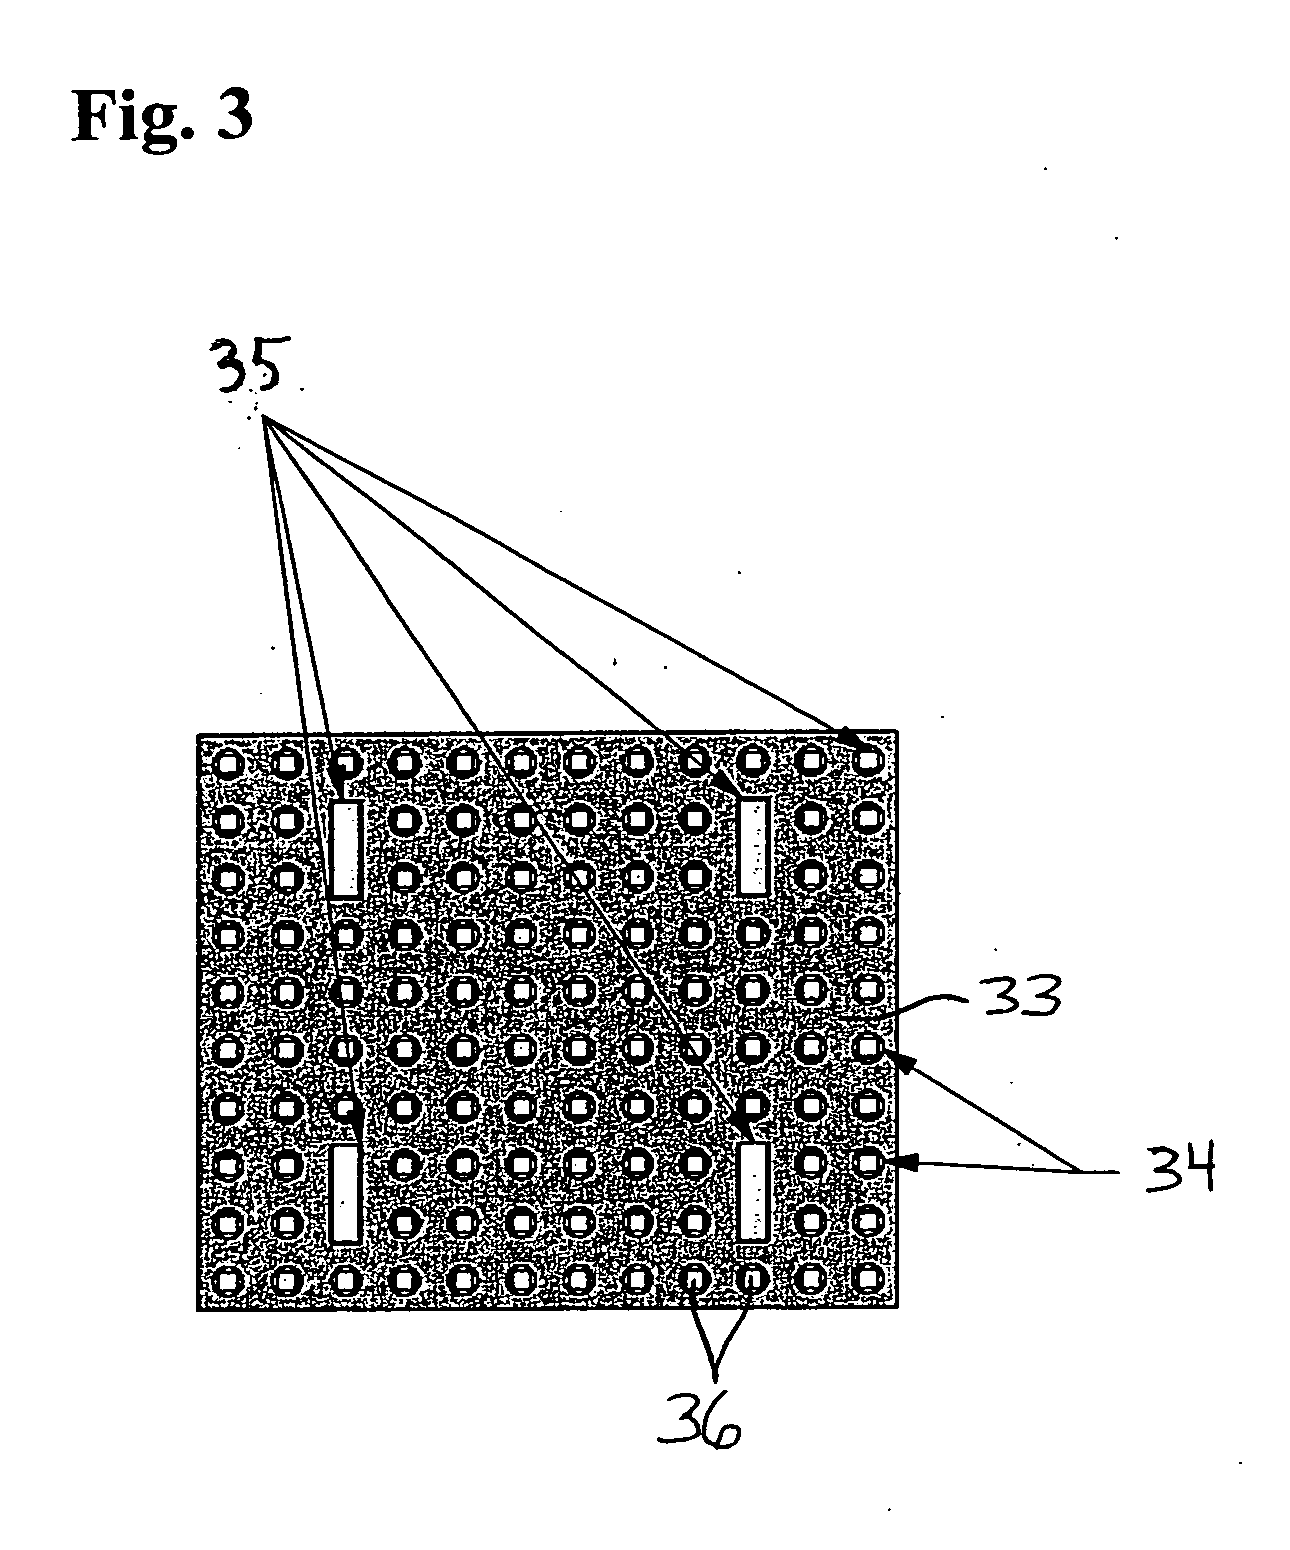 Method and apparatus for dissipating heat